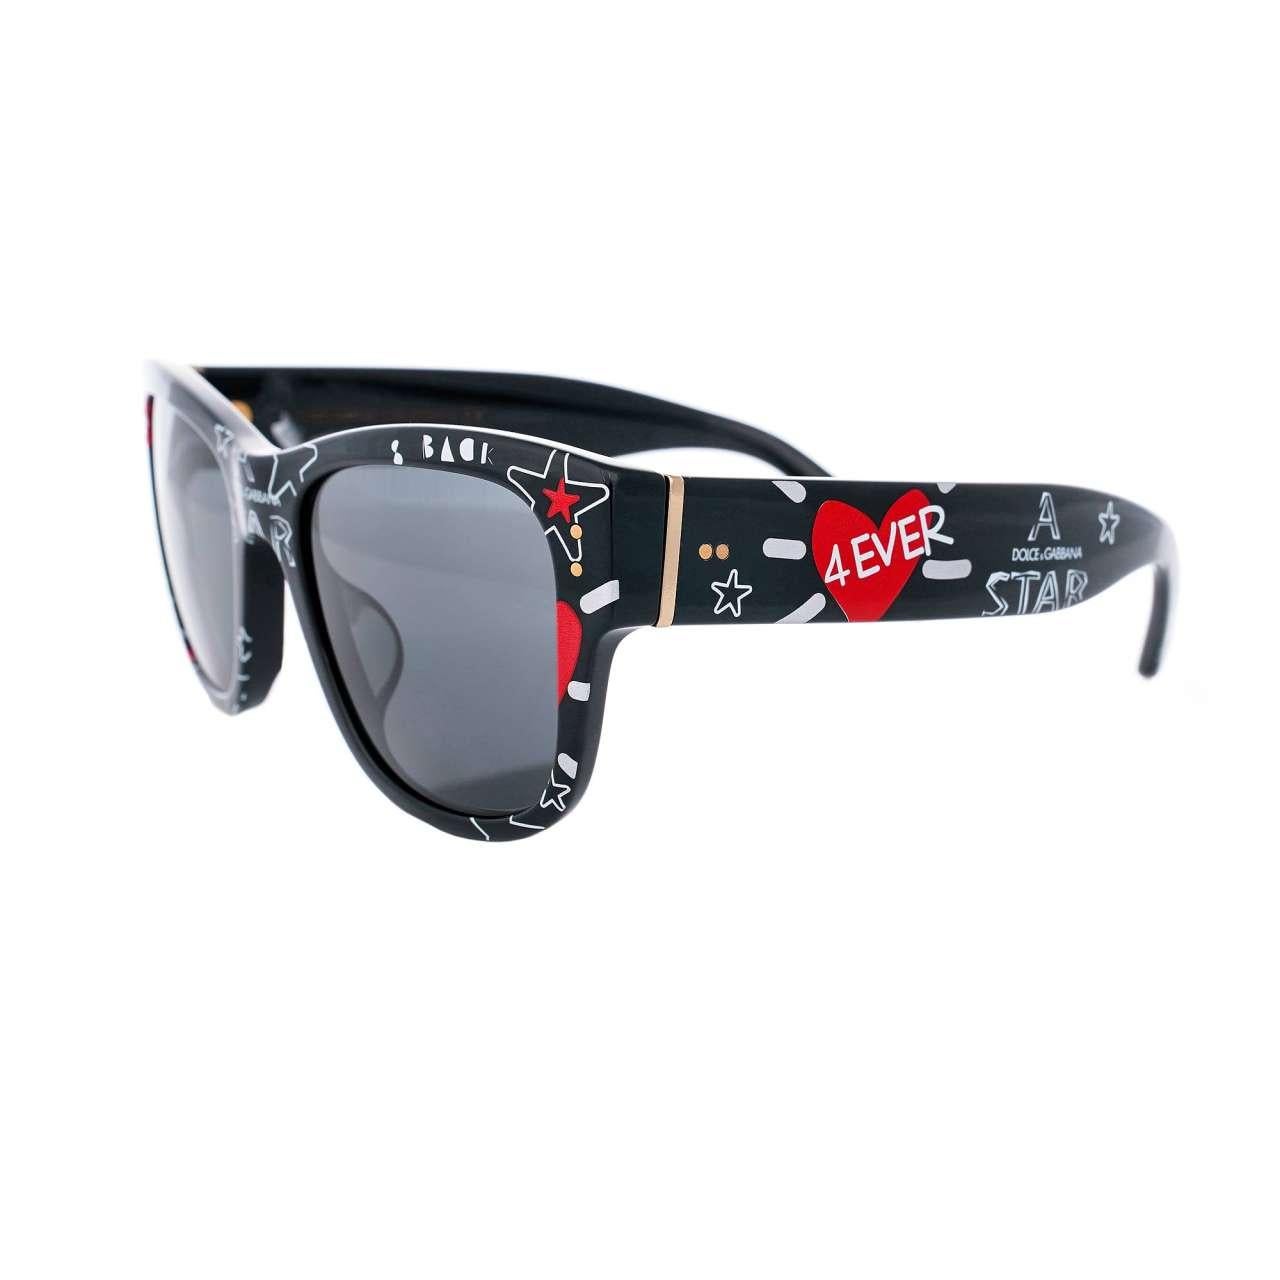 - Graffiti Print Sunglasses DG 4338 with heart and stars in black and red by DOLCE & GABBANA - MADE IN ITALY - Former RRP: EUR 400 - New with Case - Model: DG 4338 3180/87 - Color Frame: Black / Red - Color Lense: Faded black - Material Frame: 100%